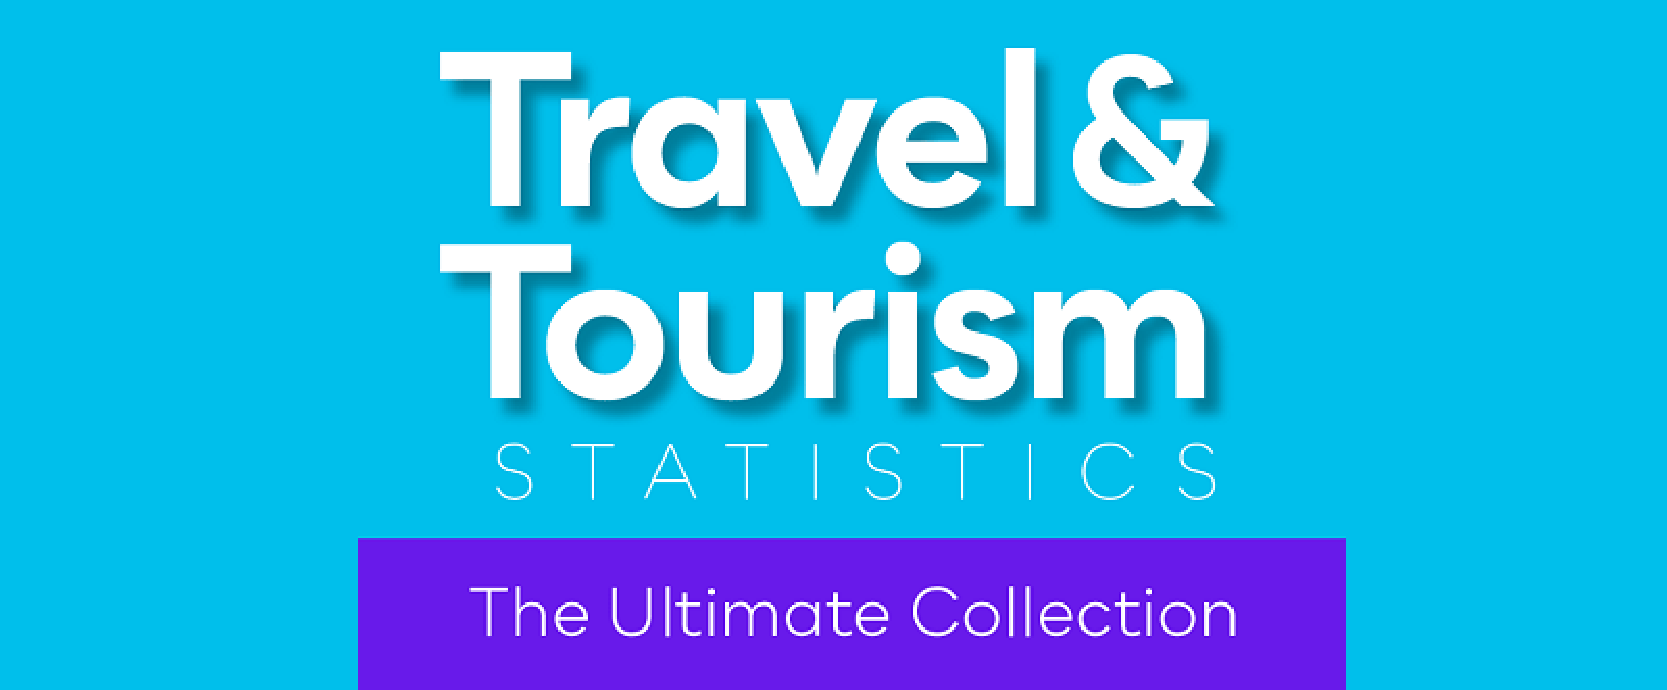 Travel and Tourism Statistics The Ultimate Collection photo